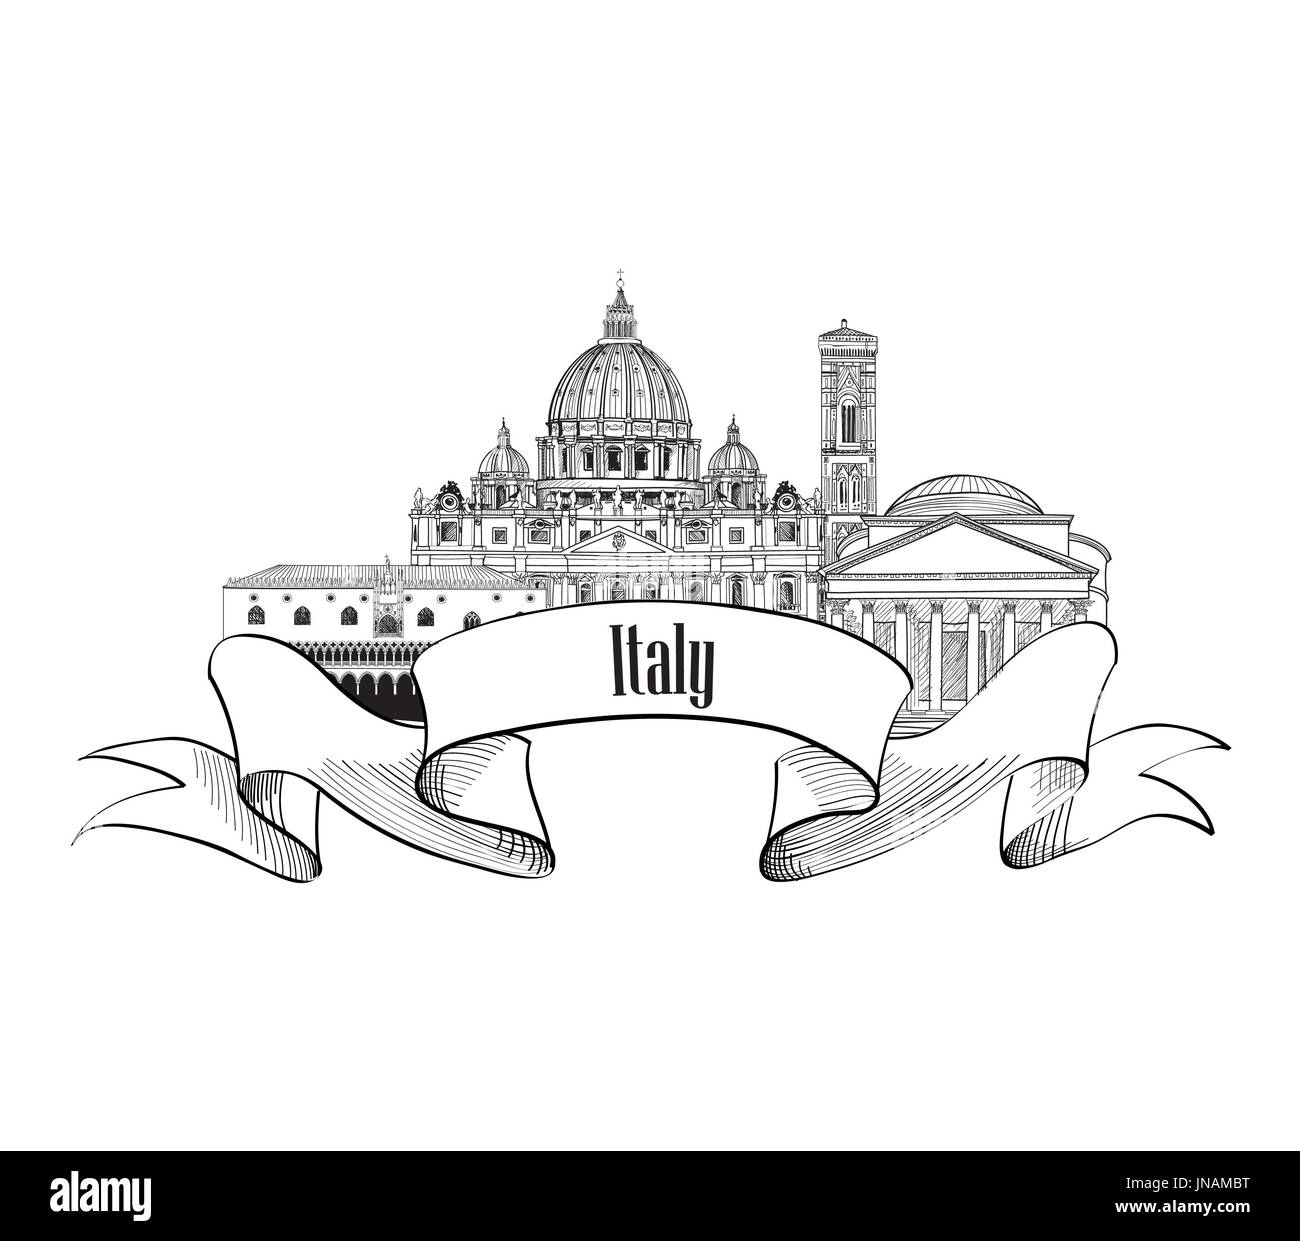 Italy architectural sign. Travel Italy label. Italian famous cities skyline. Stock Photo